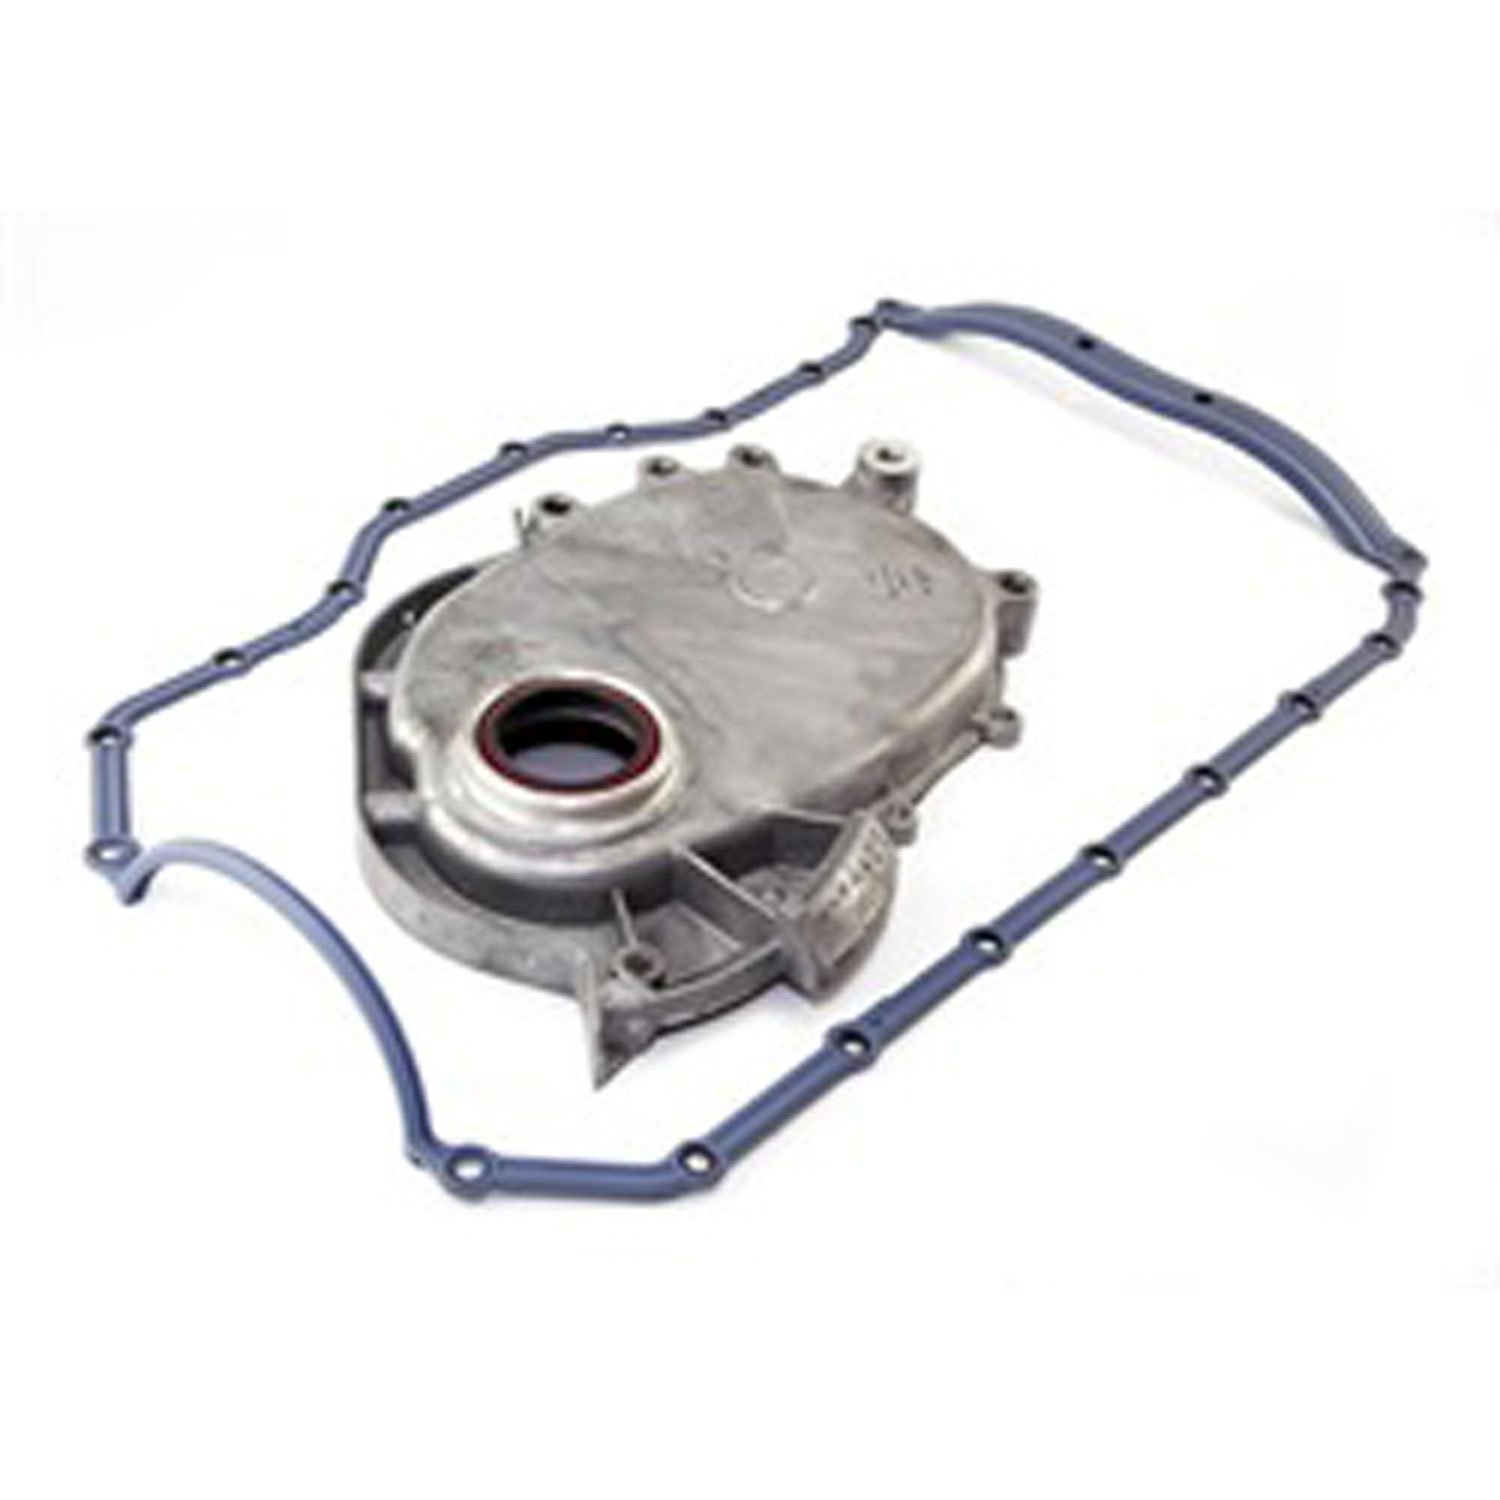 This timing chain cover kit from Rugged Ridge